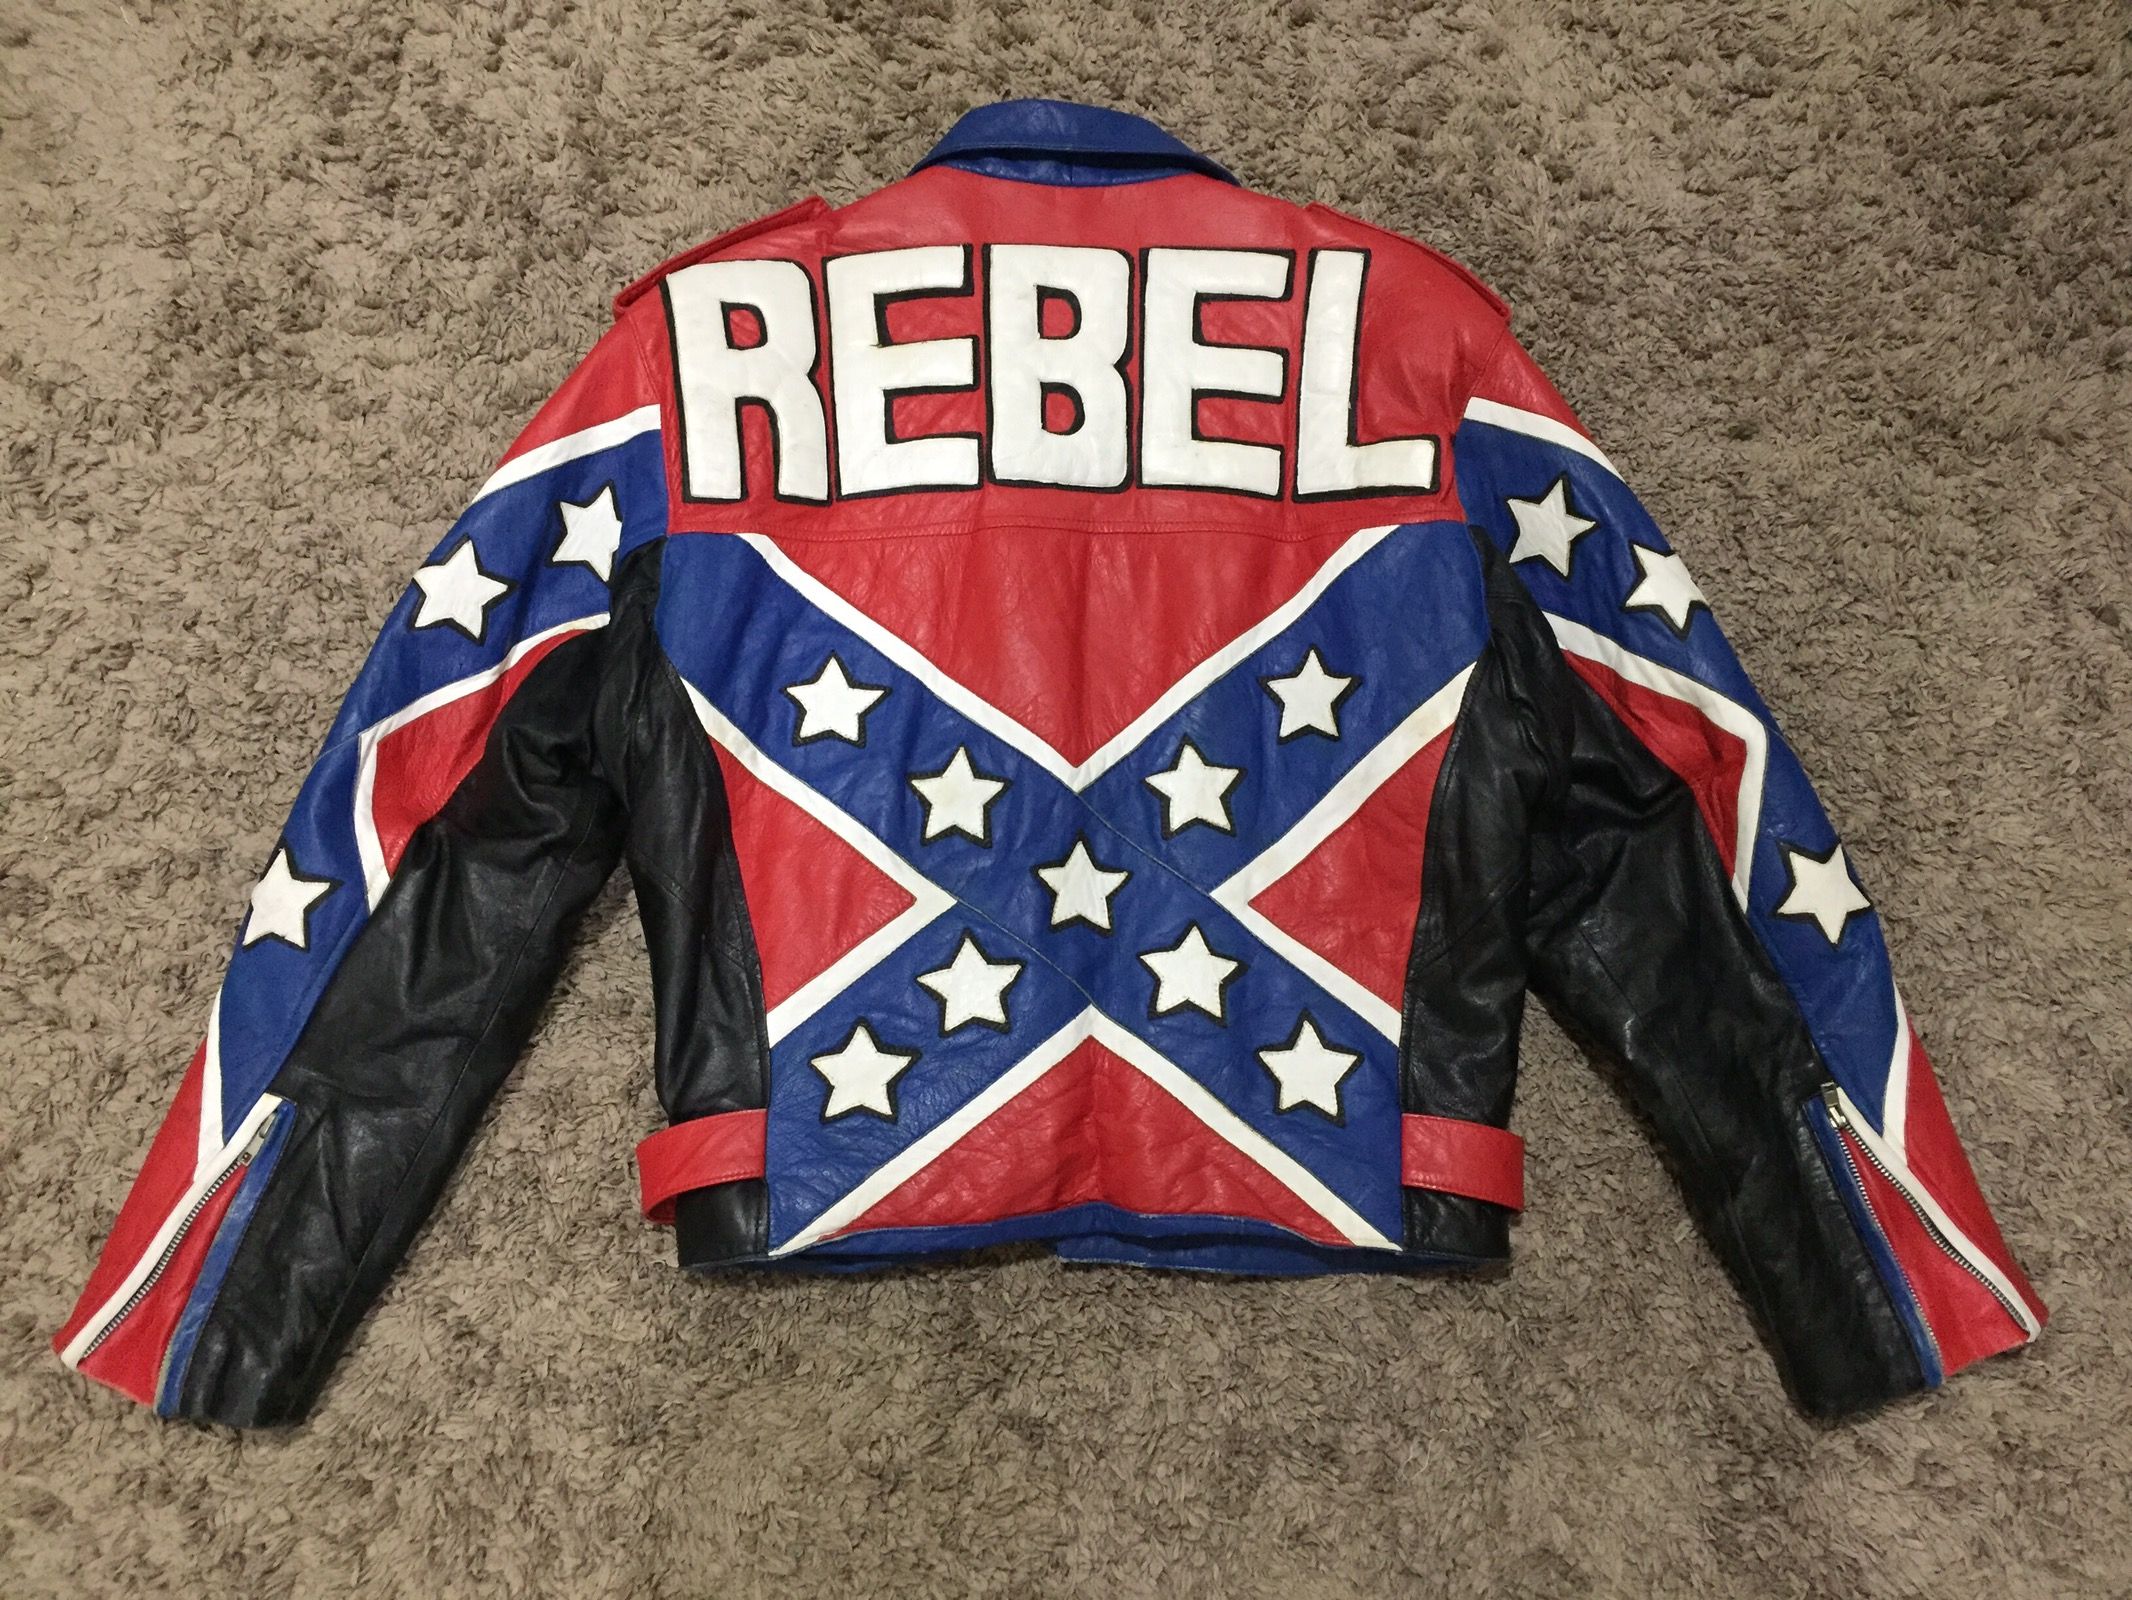 Very Rare REBEL CONFEDERATE LEATHER JAKET AXL's rose Size US S / EU 44-46 / 1 - 1 Preview